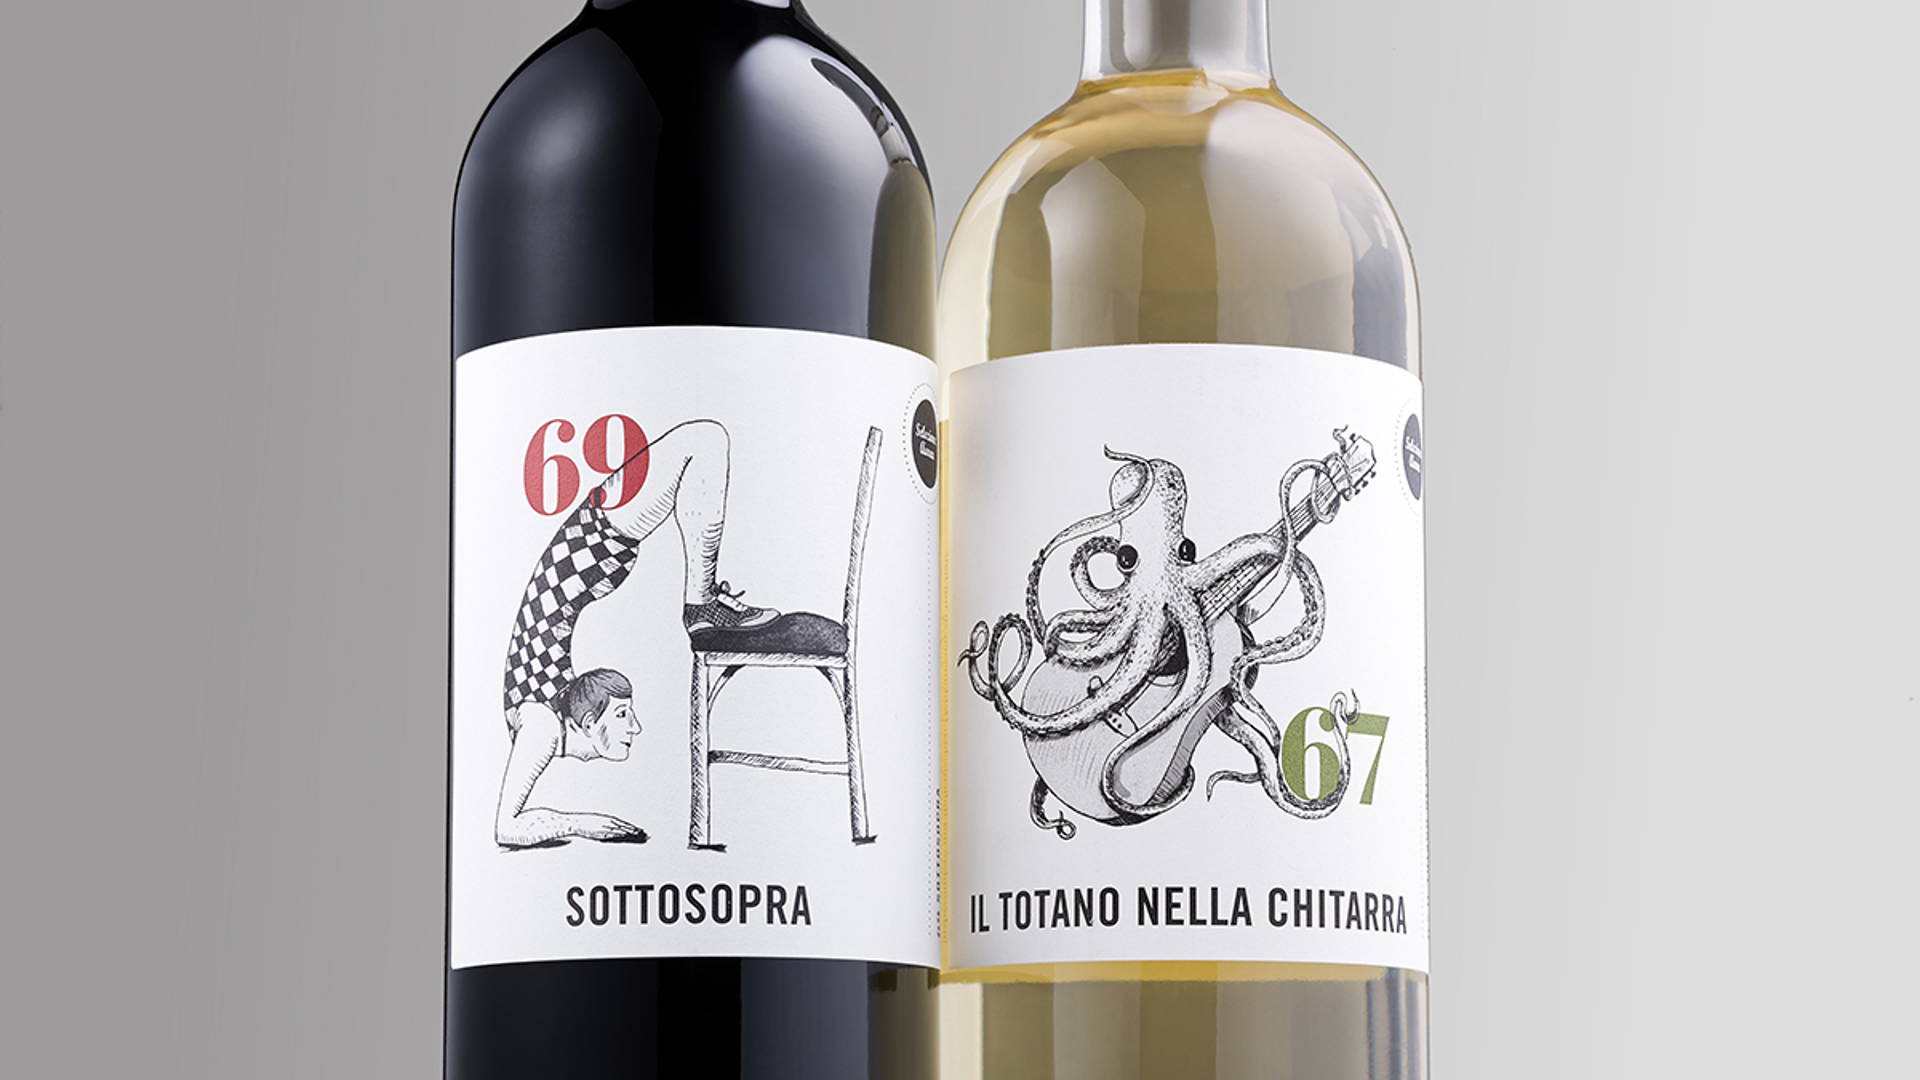 Featured image for This Wine Brand Comes With Some Seriously Quirky Illustrations